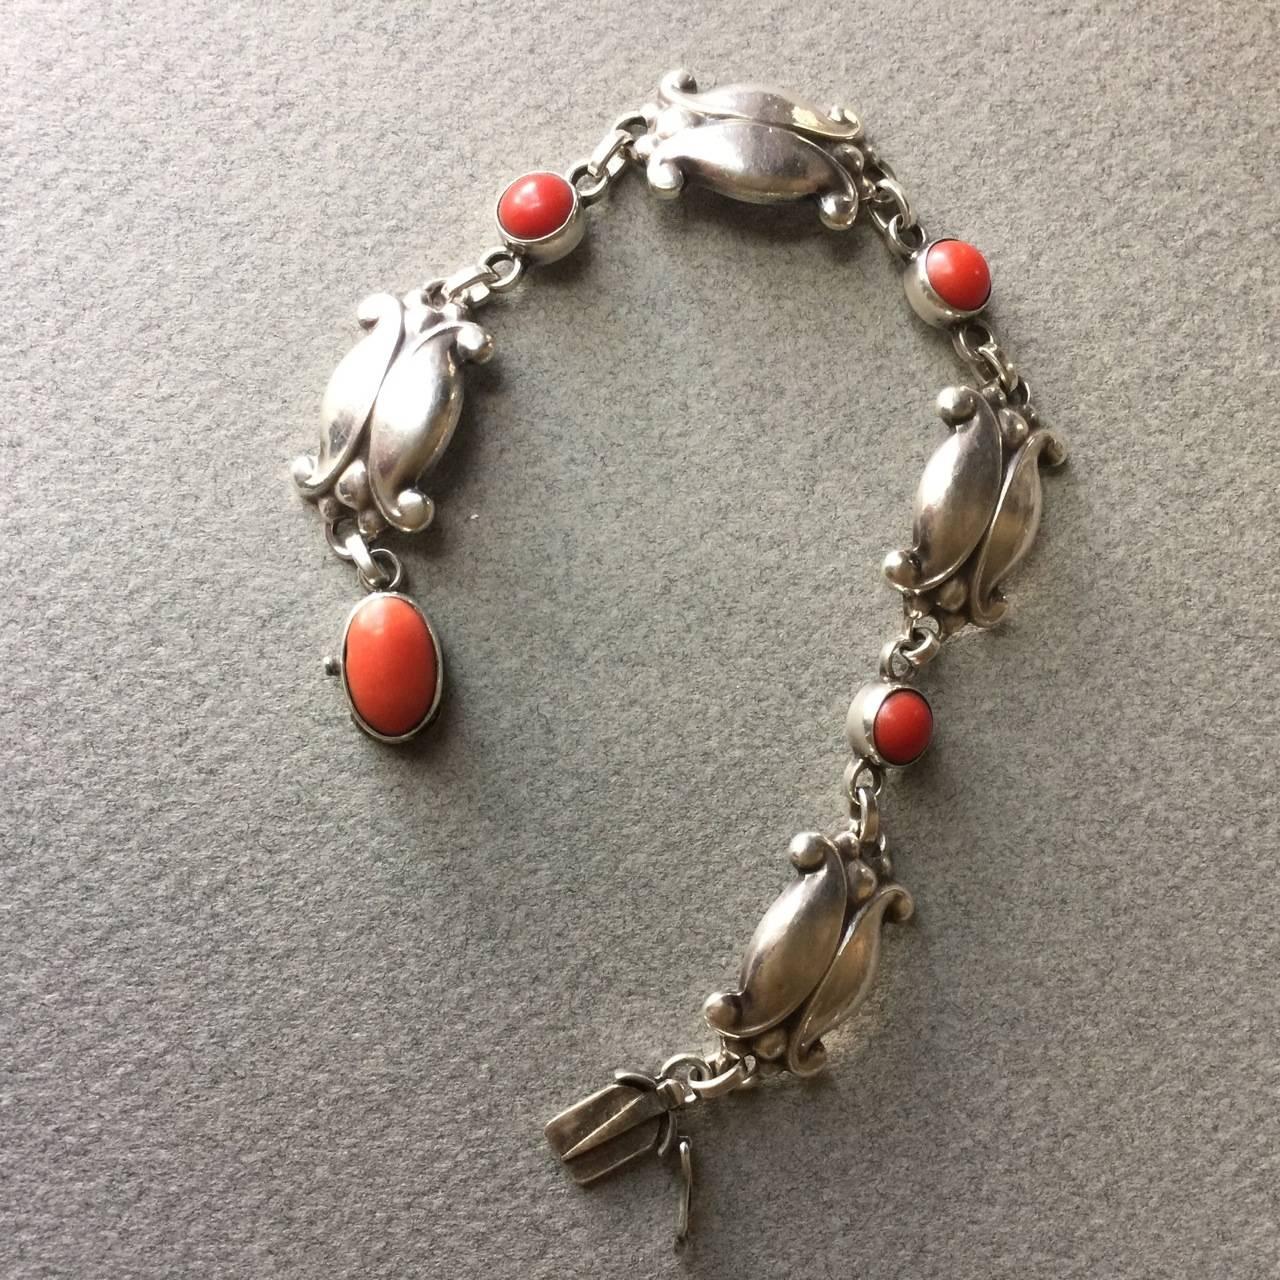 Georg Jensen Sterling Silver Bracelet No. 11 with Coral.

Lovely bracelet with beautiful patina. The coral stones are vivid and in great condition.

A similar example can be found on p. 116 in the book, 